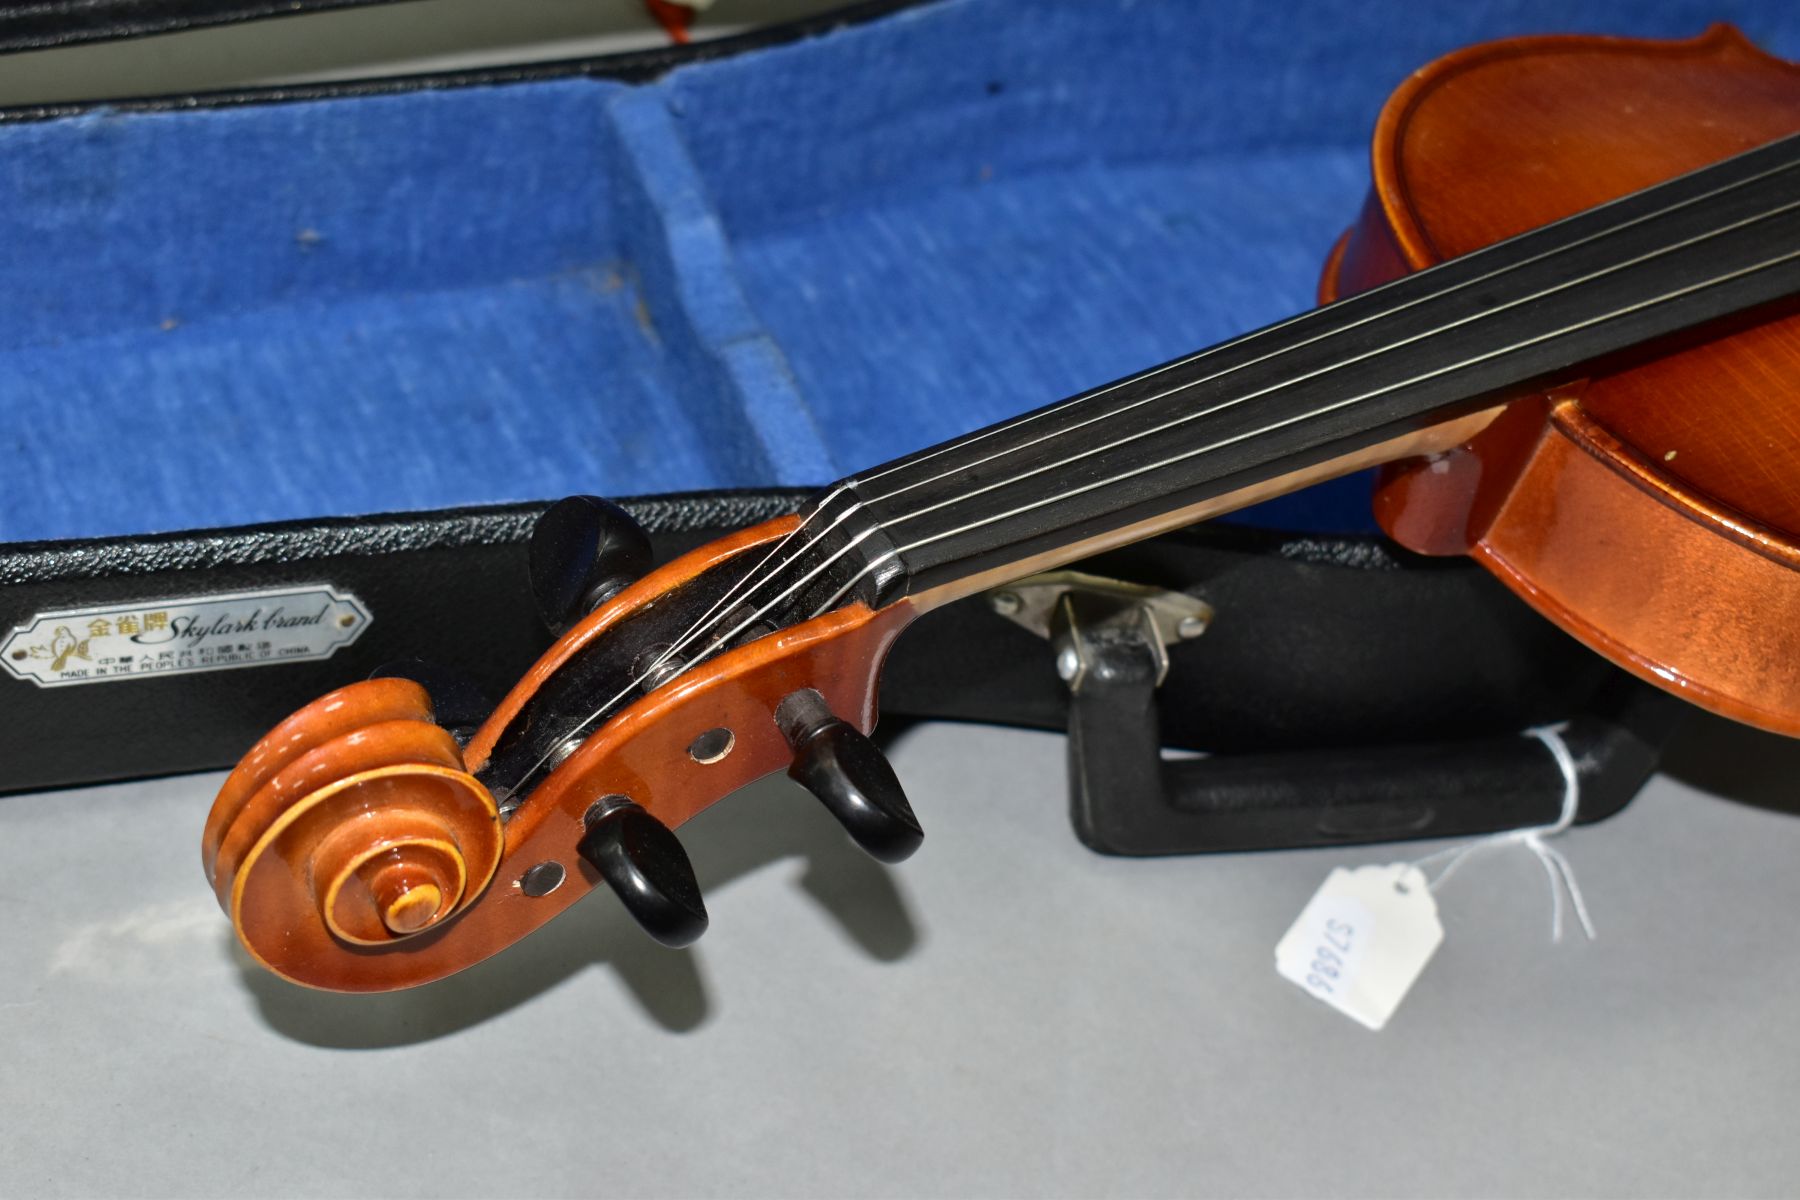 TWO STUDENT VIOLINS, BODY LENGTH APPROXIMATELY 35CM, one is a Chinese example with a Lark brand - Image 9 of 11